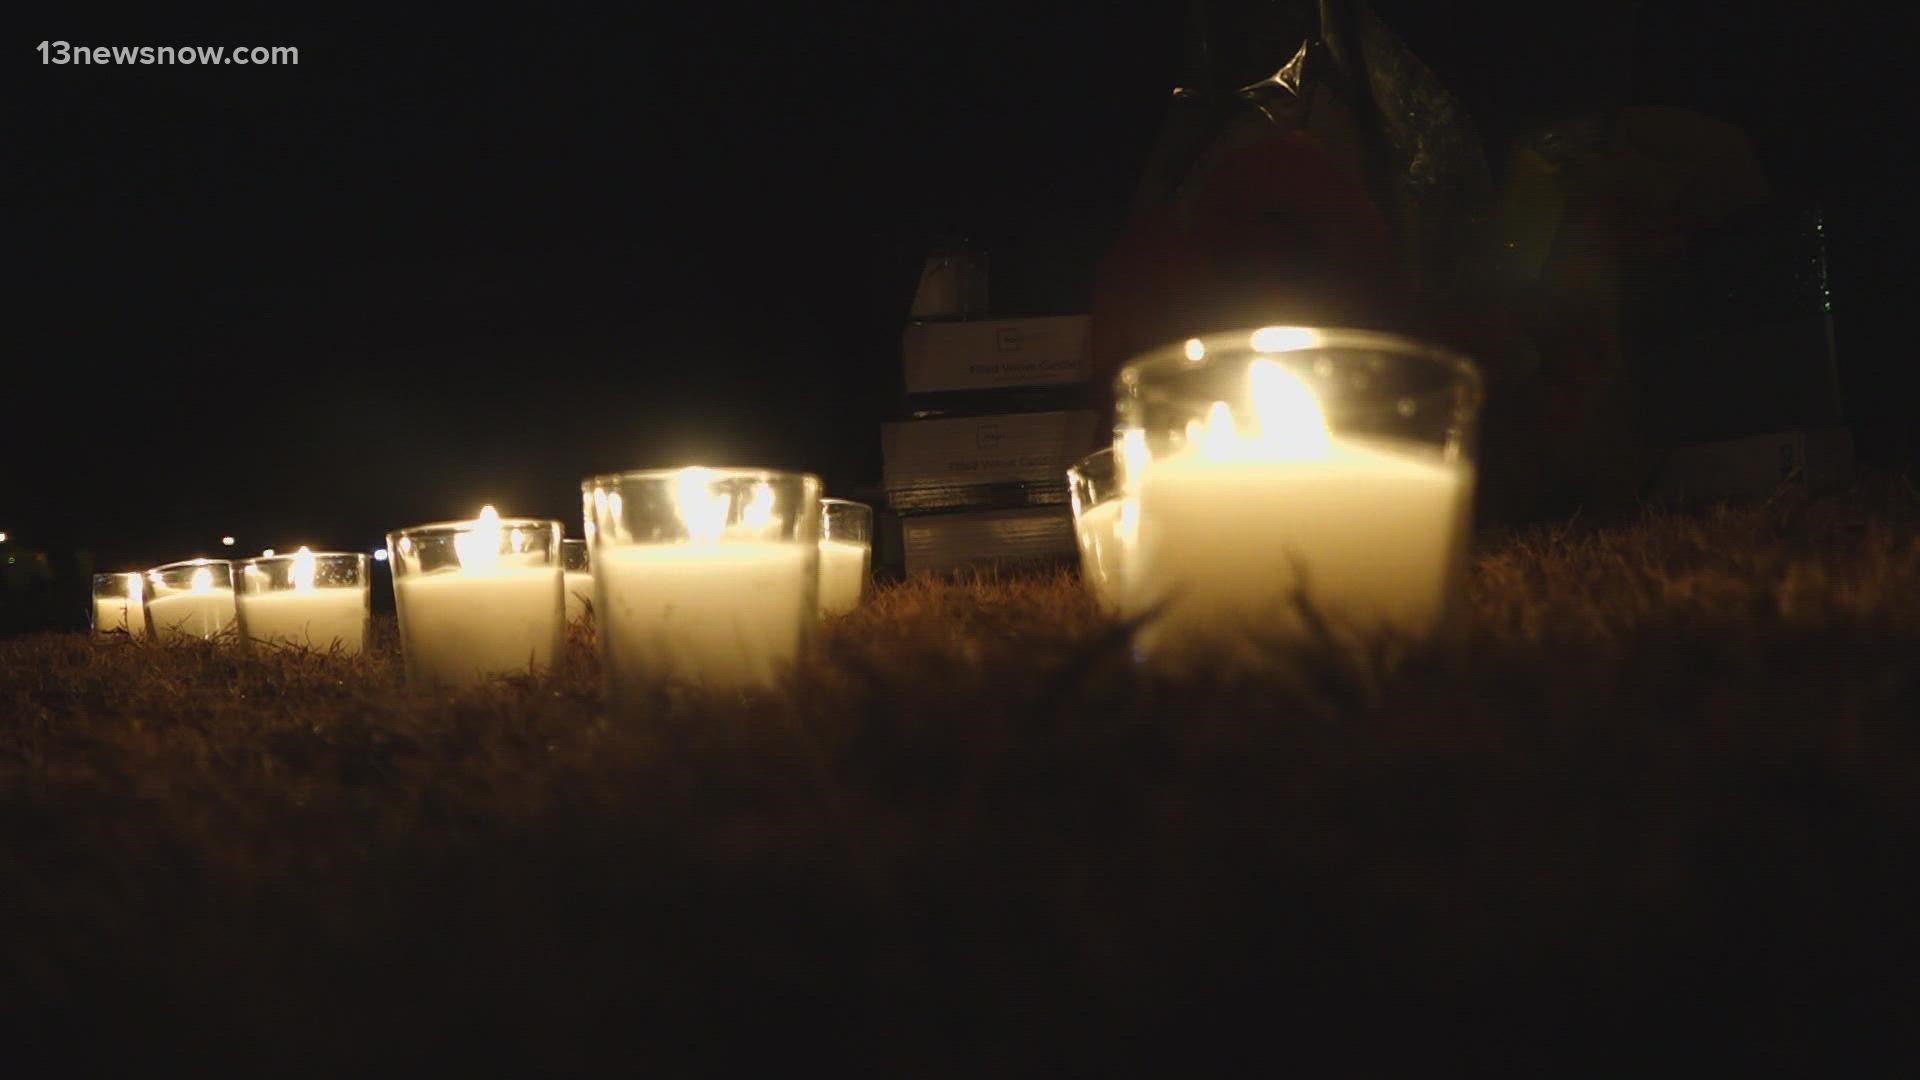 Buses full of people walked onto a field lit with candles to honor and remember the lives lost in the Walmart mass shooting - each with their own story.